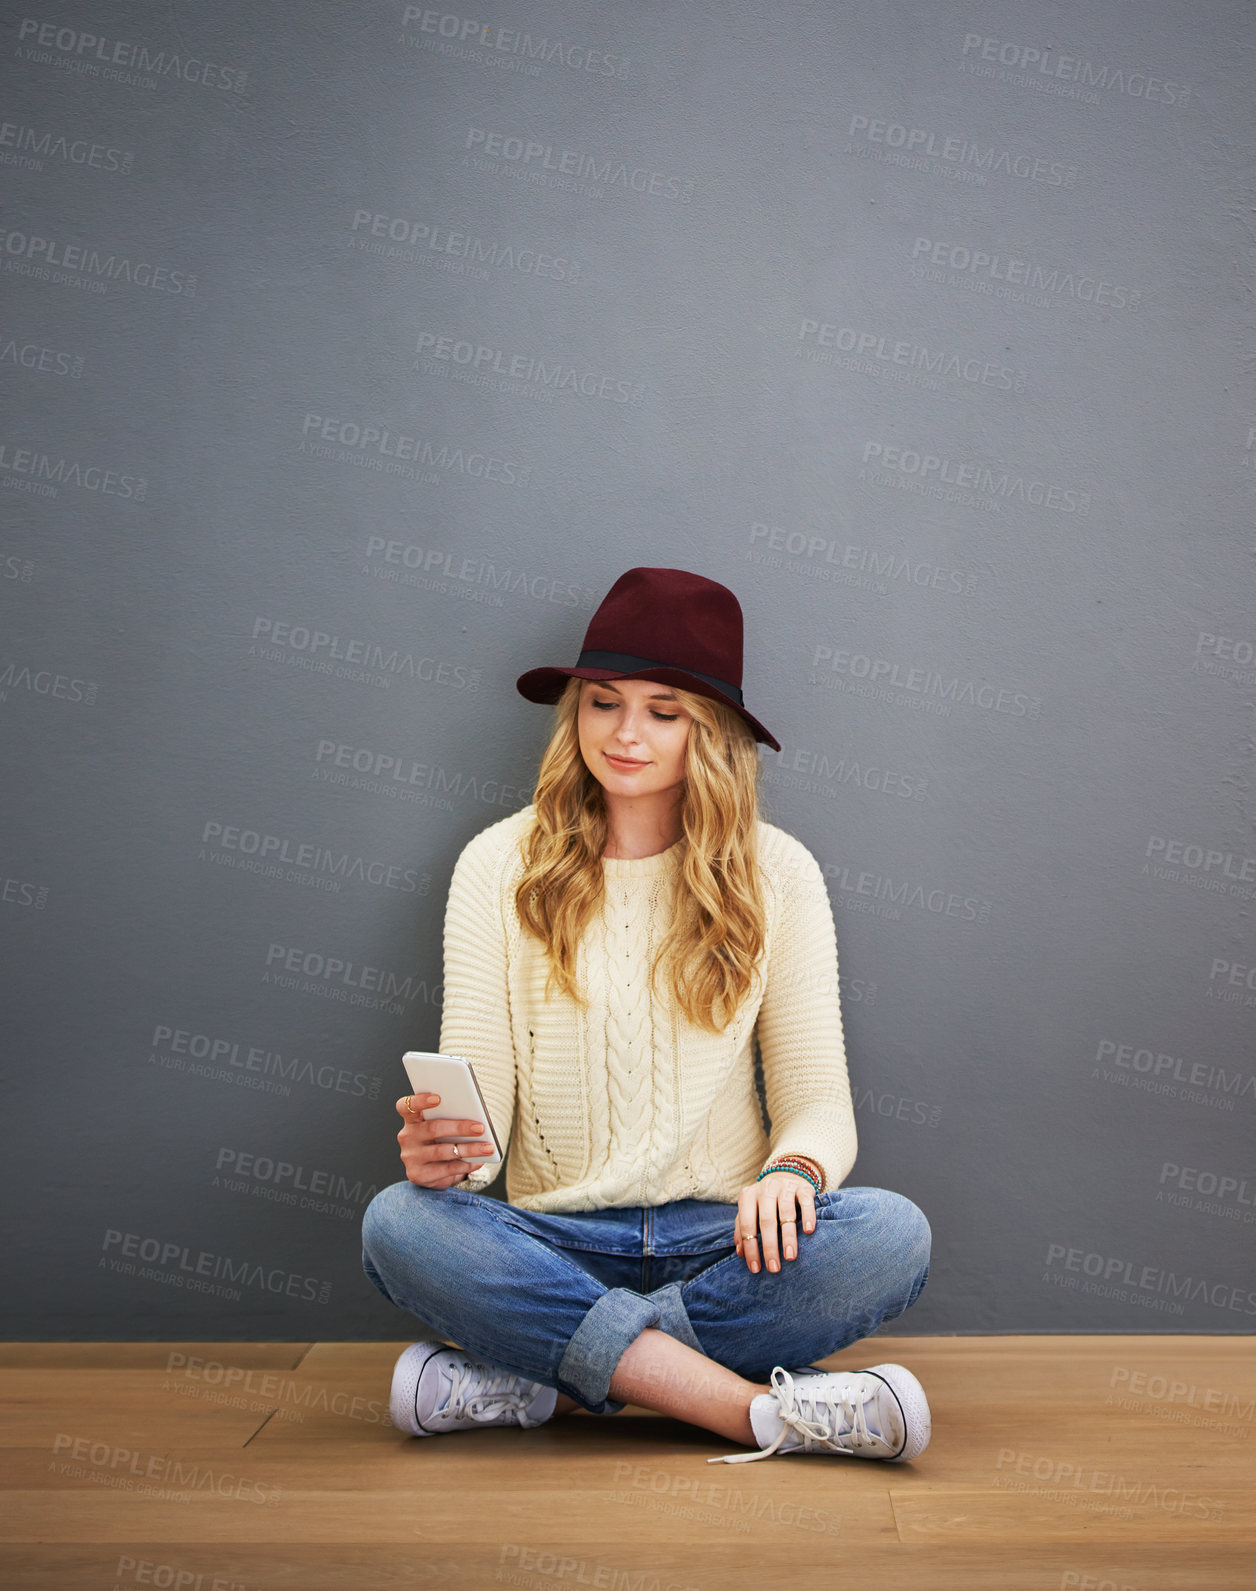 Buy stock photo Shot of a young woman using her cellphone while sitting against a gray background